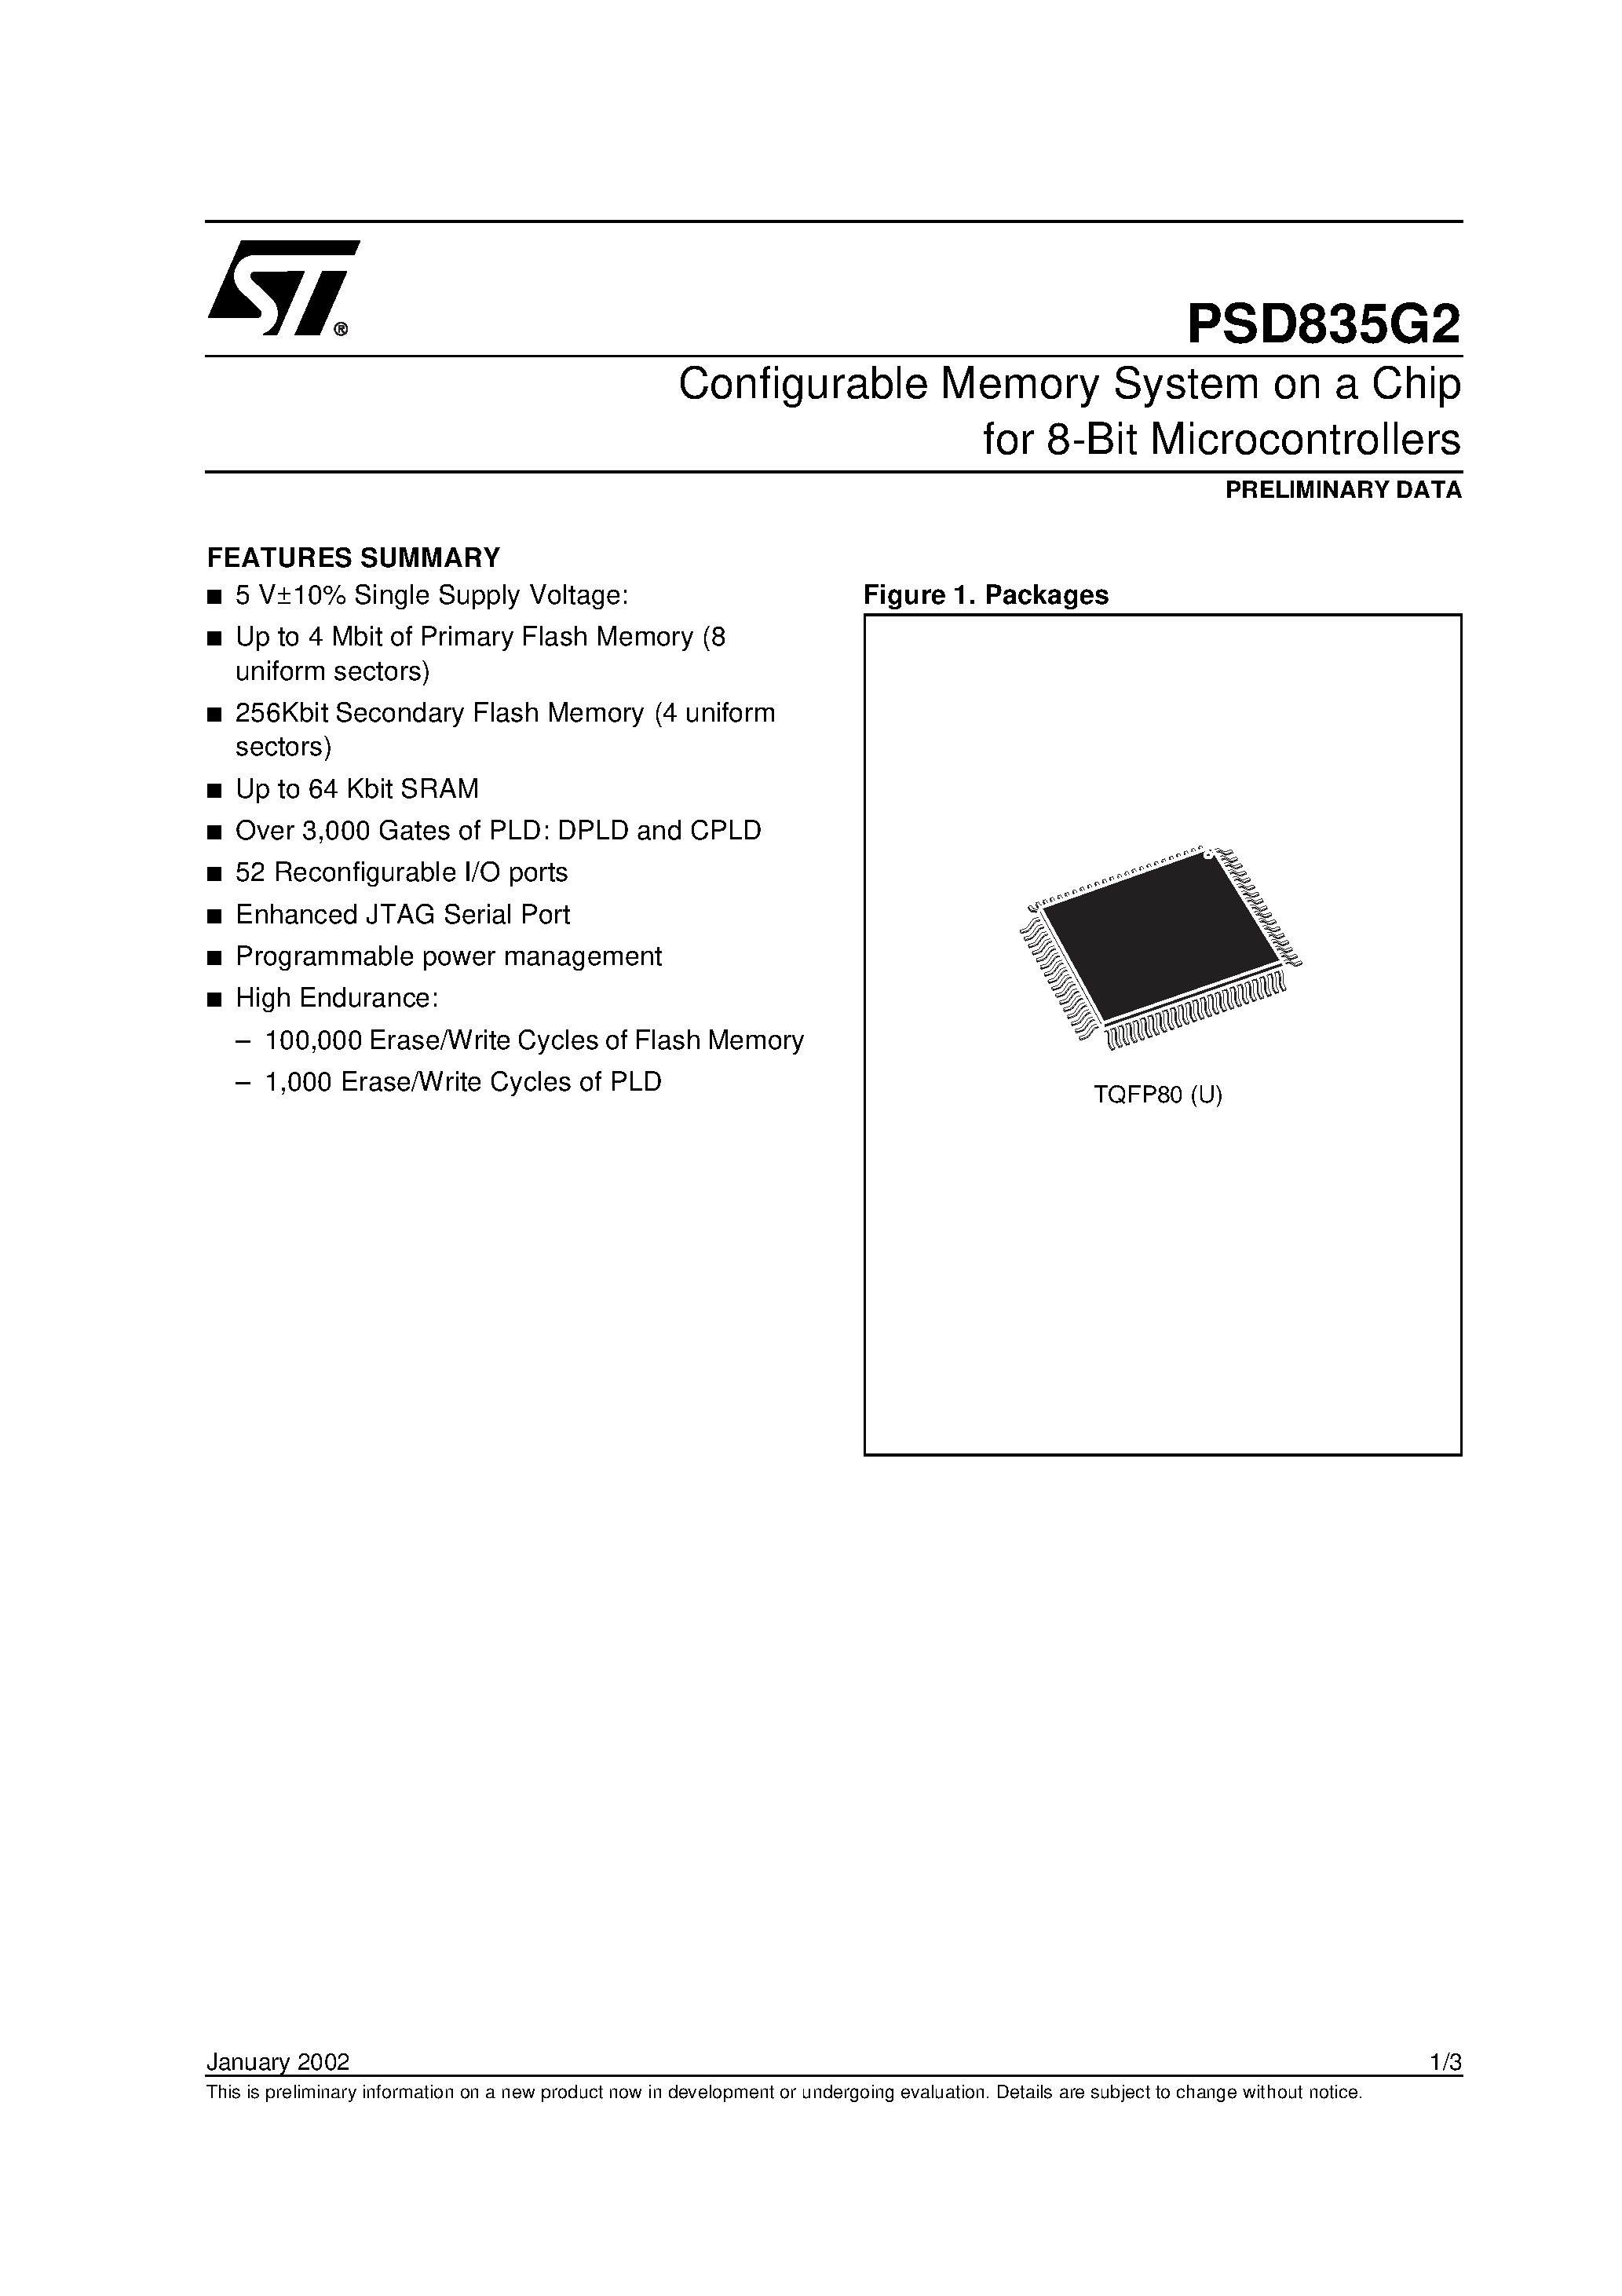 Datasheet PSD835F2V-A-90M - Configurable Memory System on a Chip for 8-Bit Microcontrollers page 1